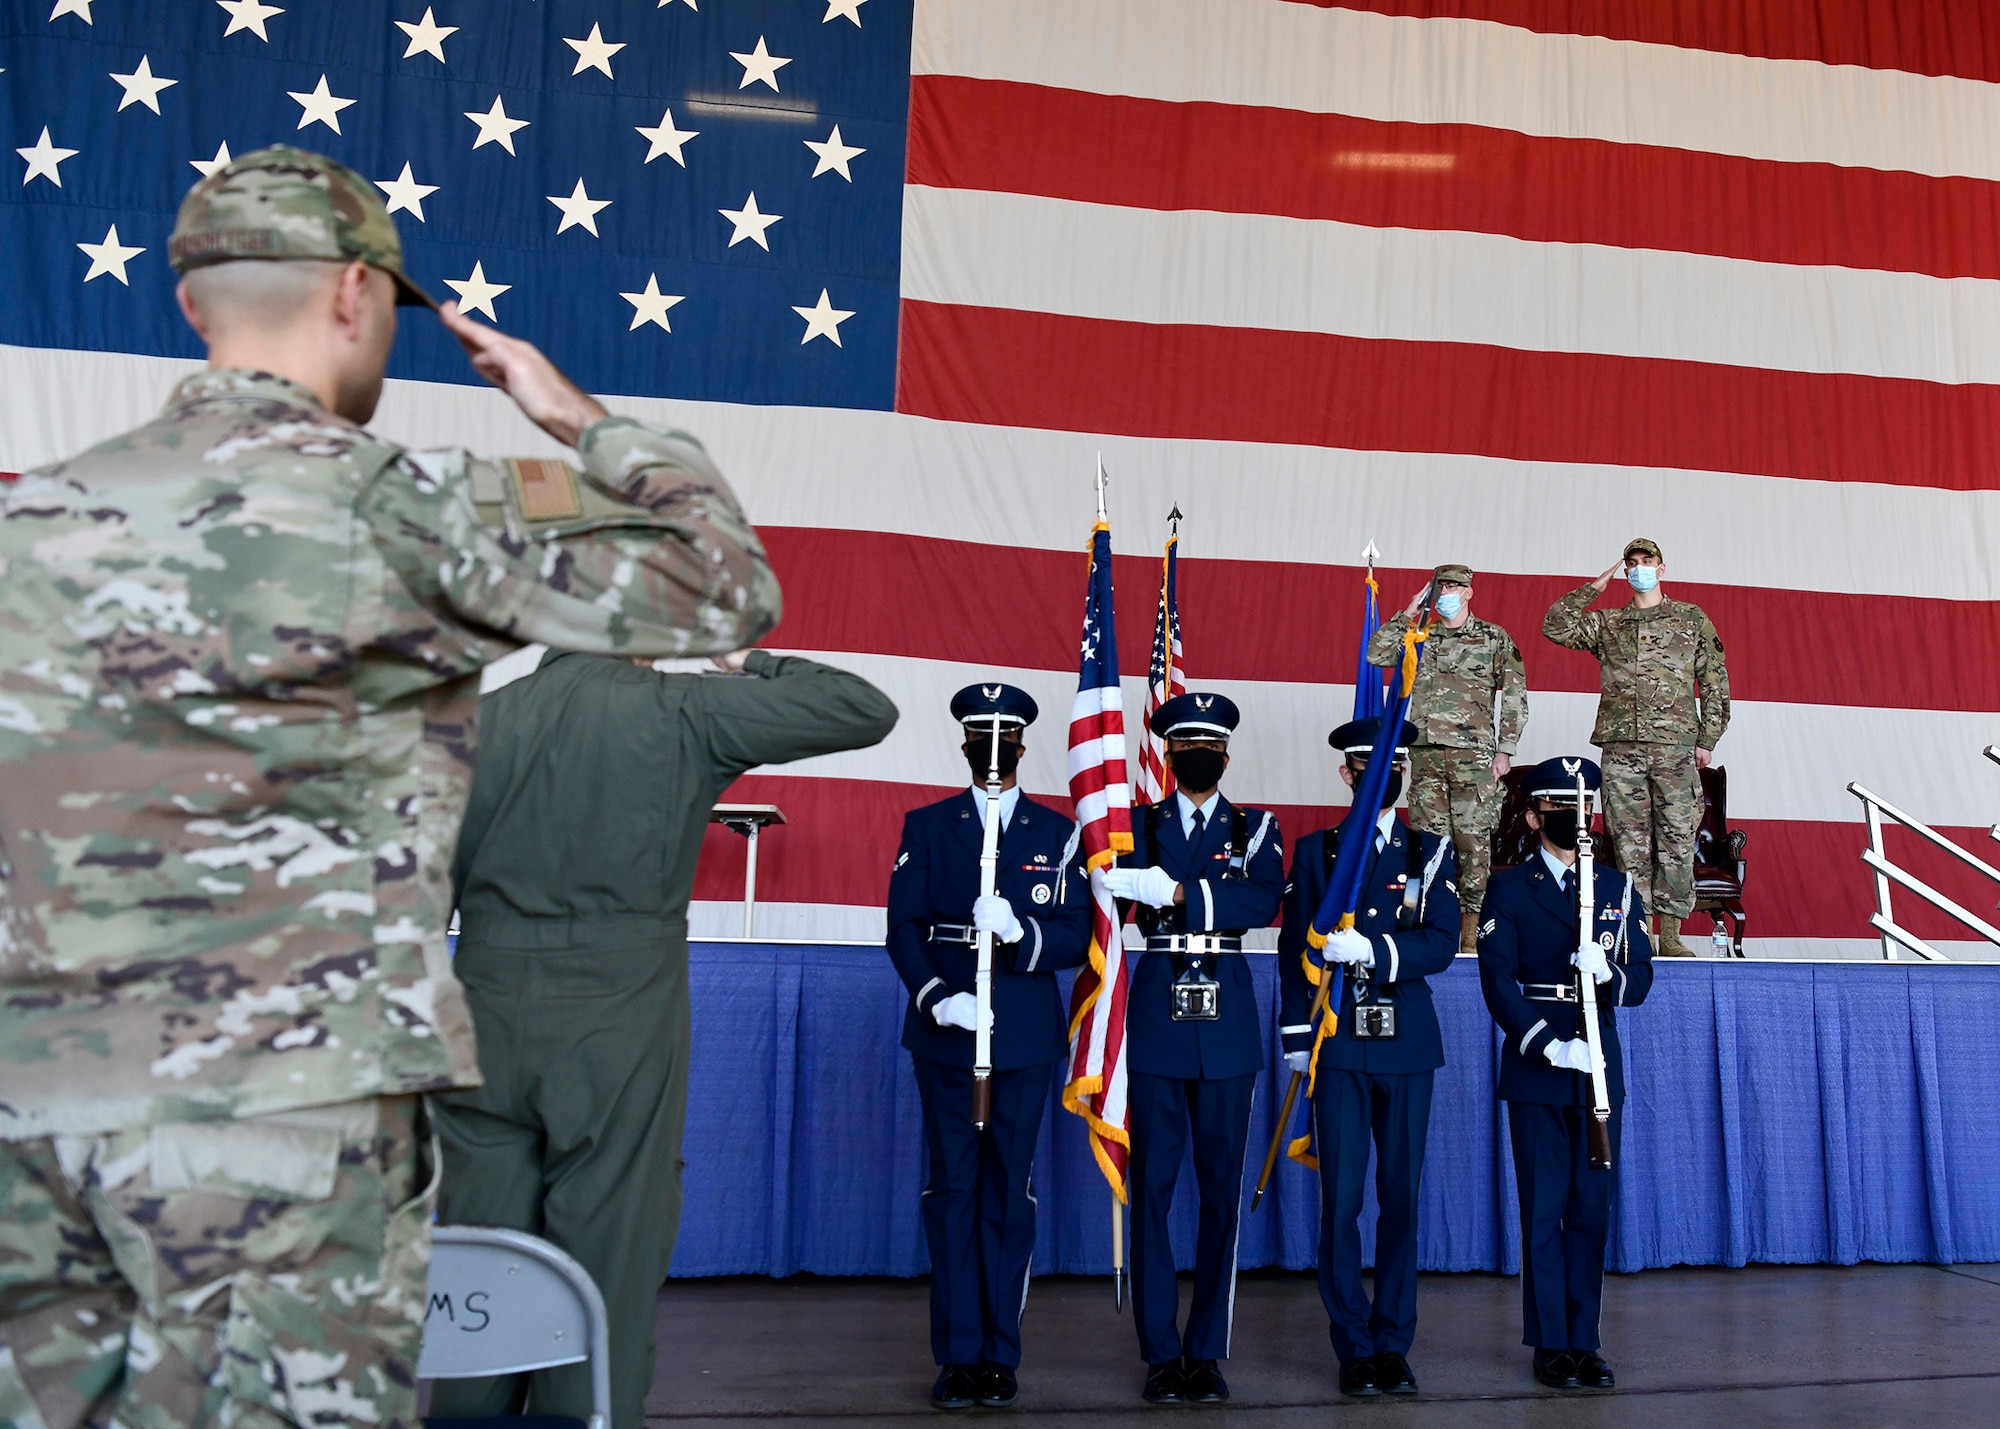 The 944th Civil Engineer Squadron held an assumption of command ceremony to welcome Reserve Citizen Airman Maj. Corey Lohmiller, as their new squadron commander at Luke Air Force Base, Arizona, November 6, 2021.